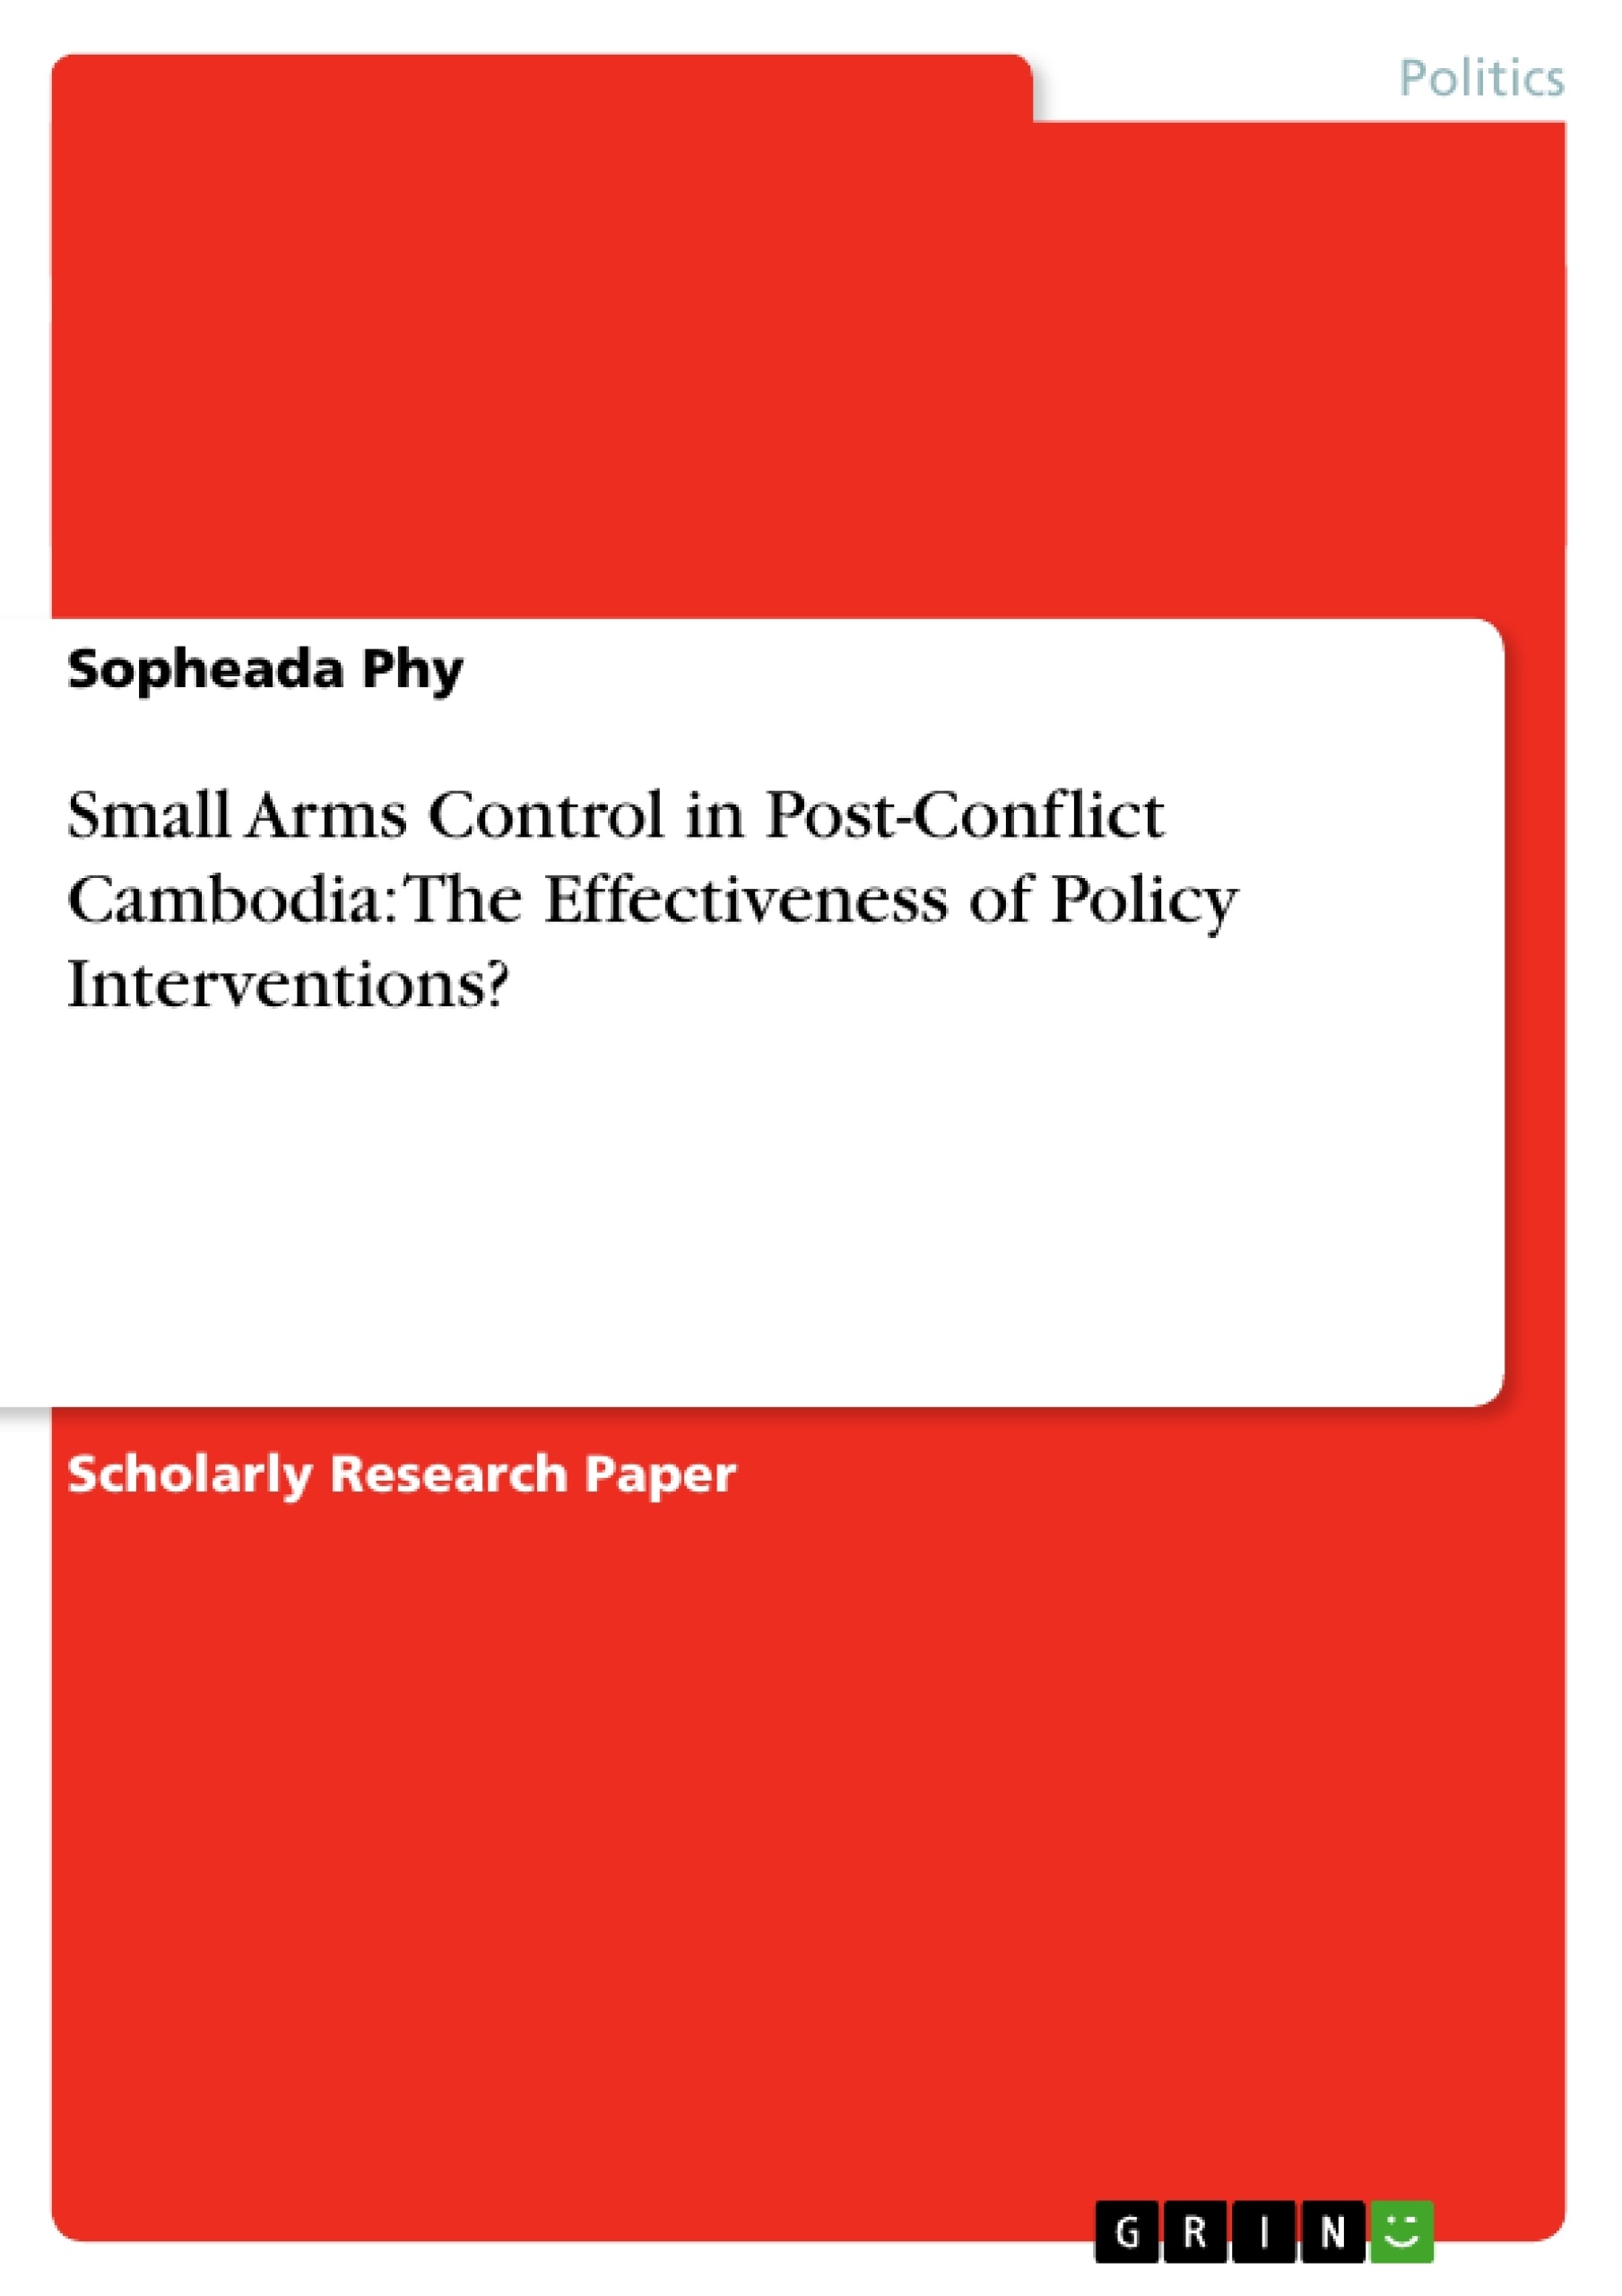 Título: Small Arms Control in Post-Conflict Cambodia: The Effectiveness of Policy Interventions?